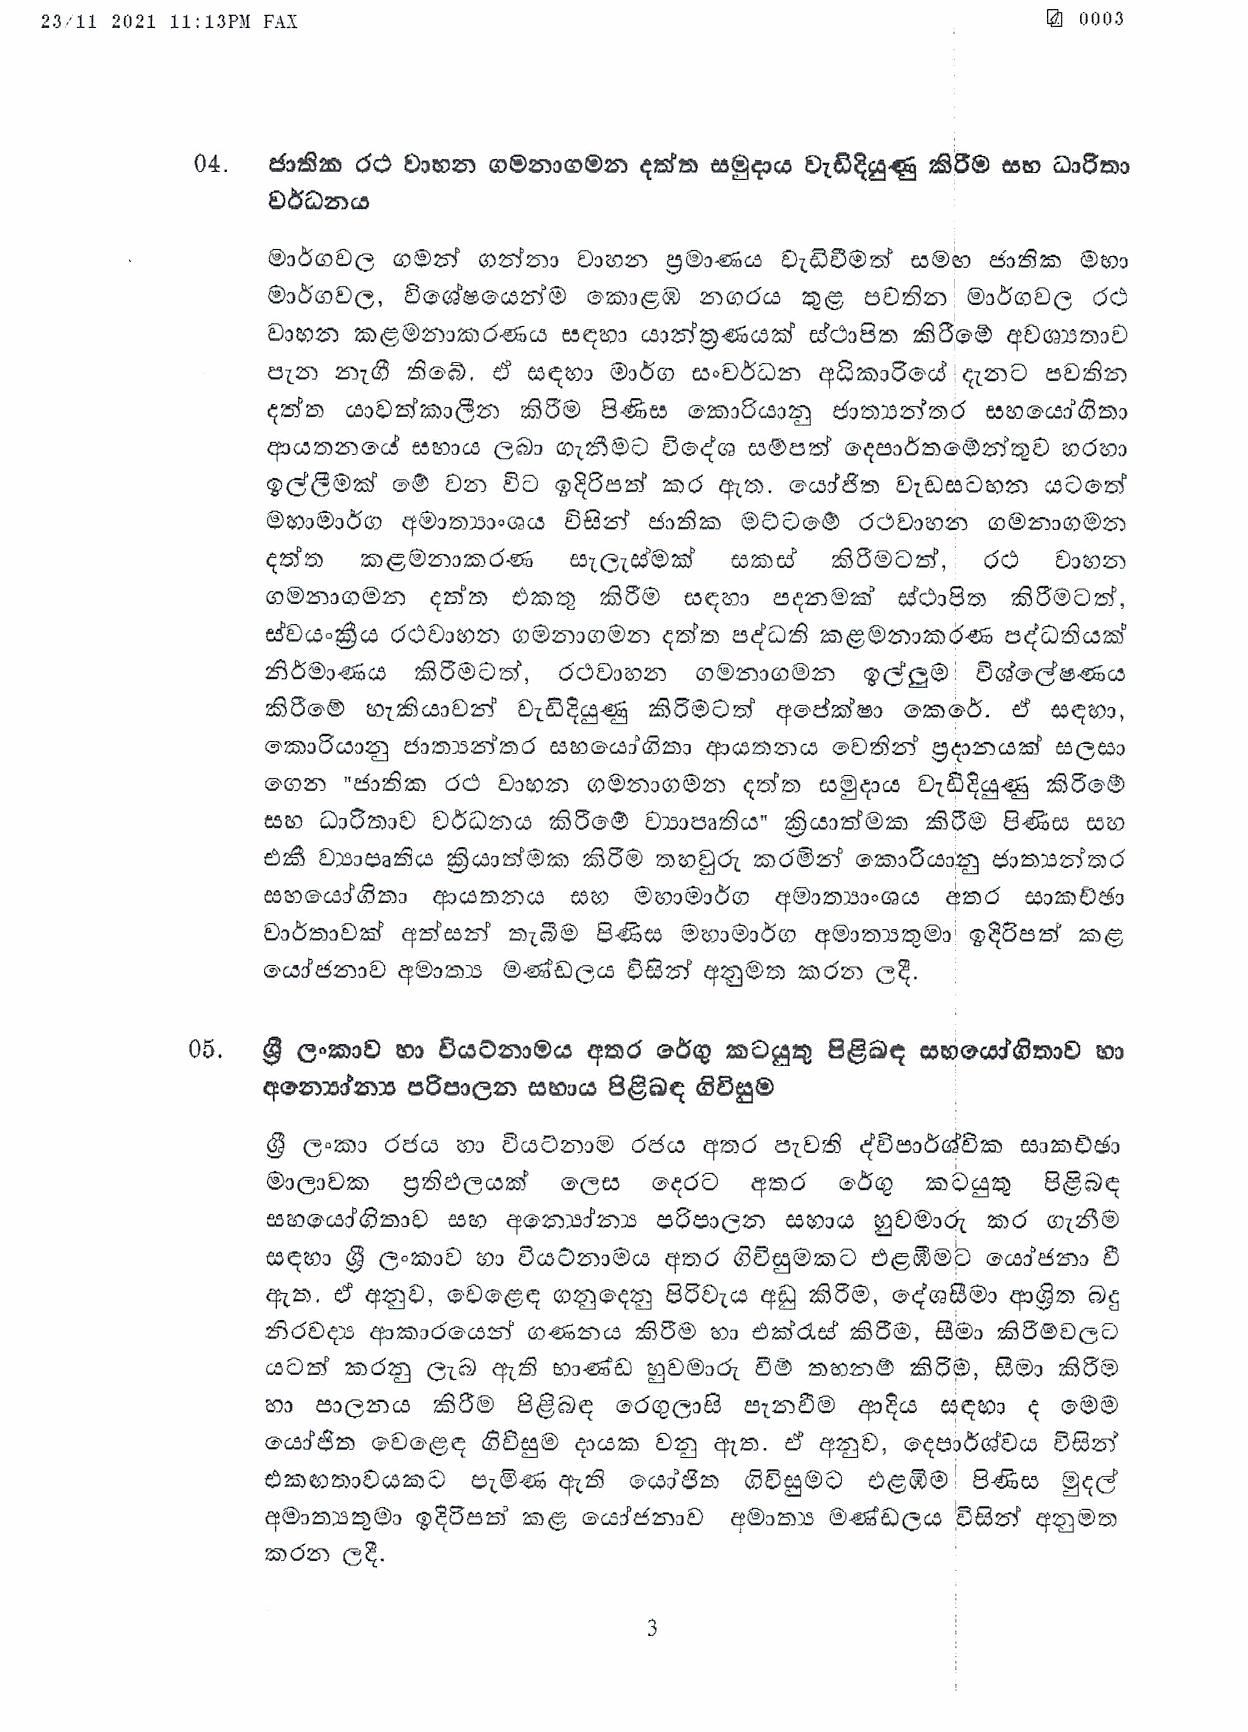 Cabinet Decision on 23.11.2021 page 003